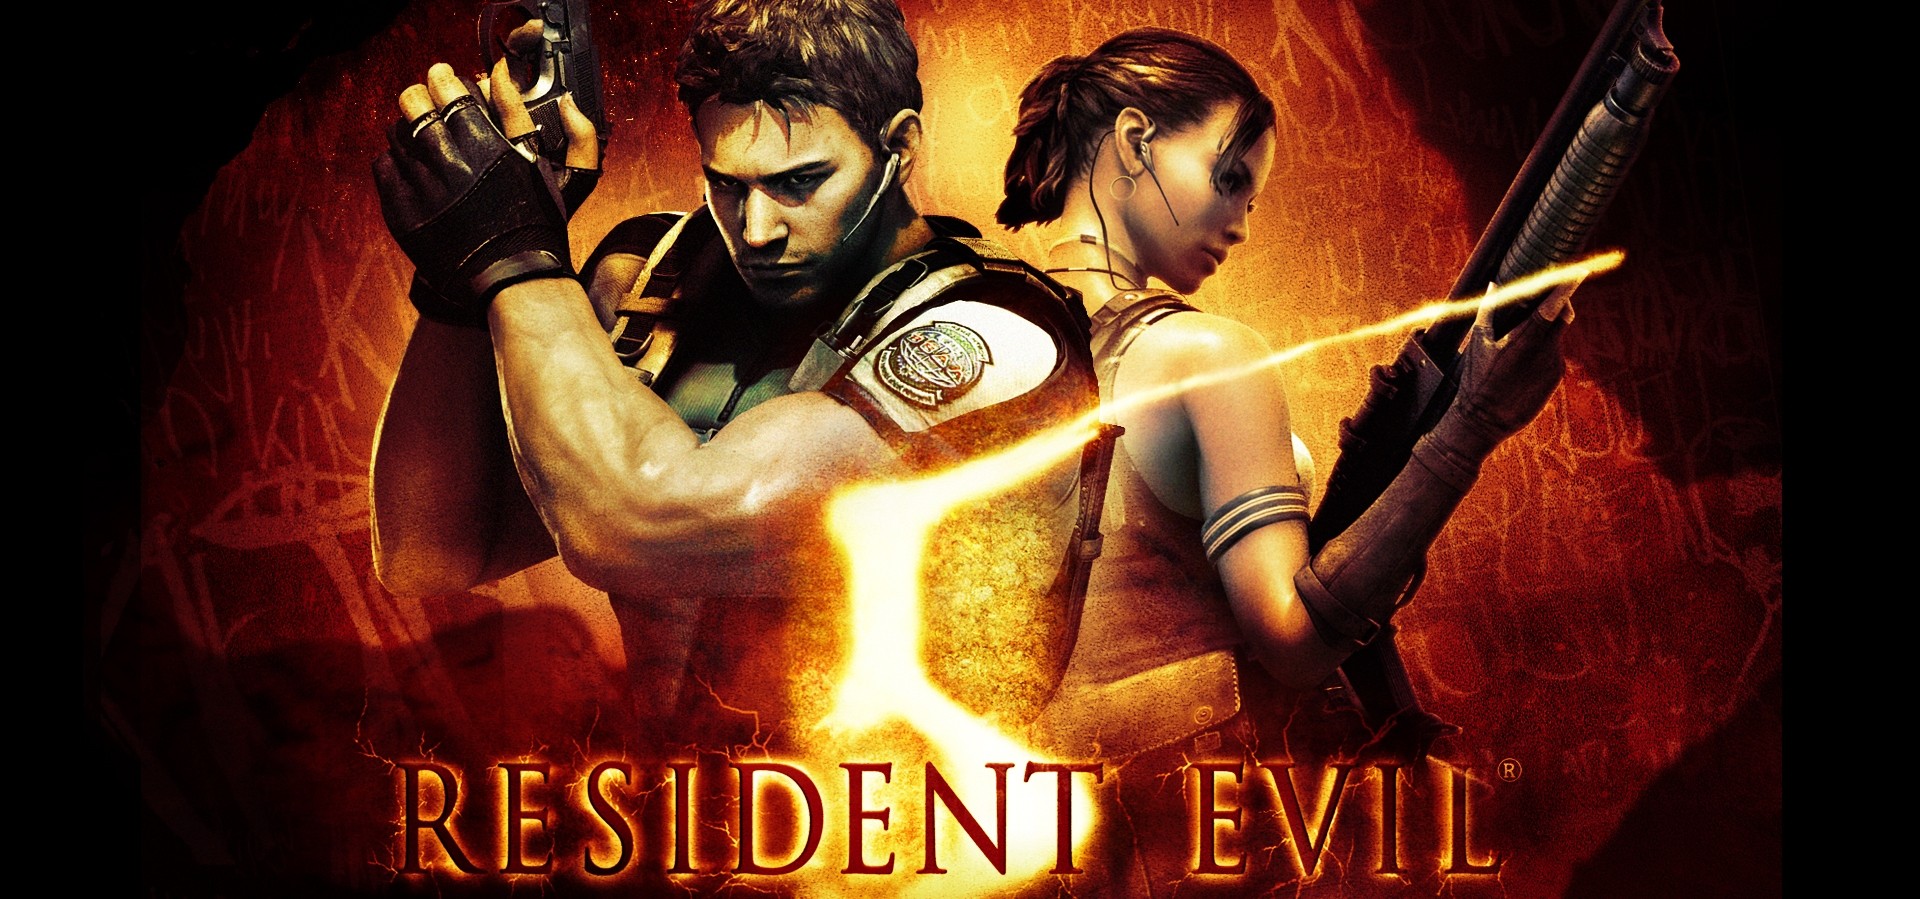  Tomorrow sunny 24X36 INCH / Game Resident Evil 5